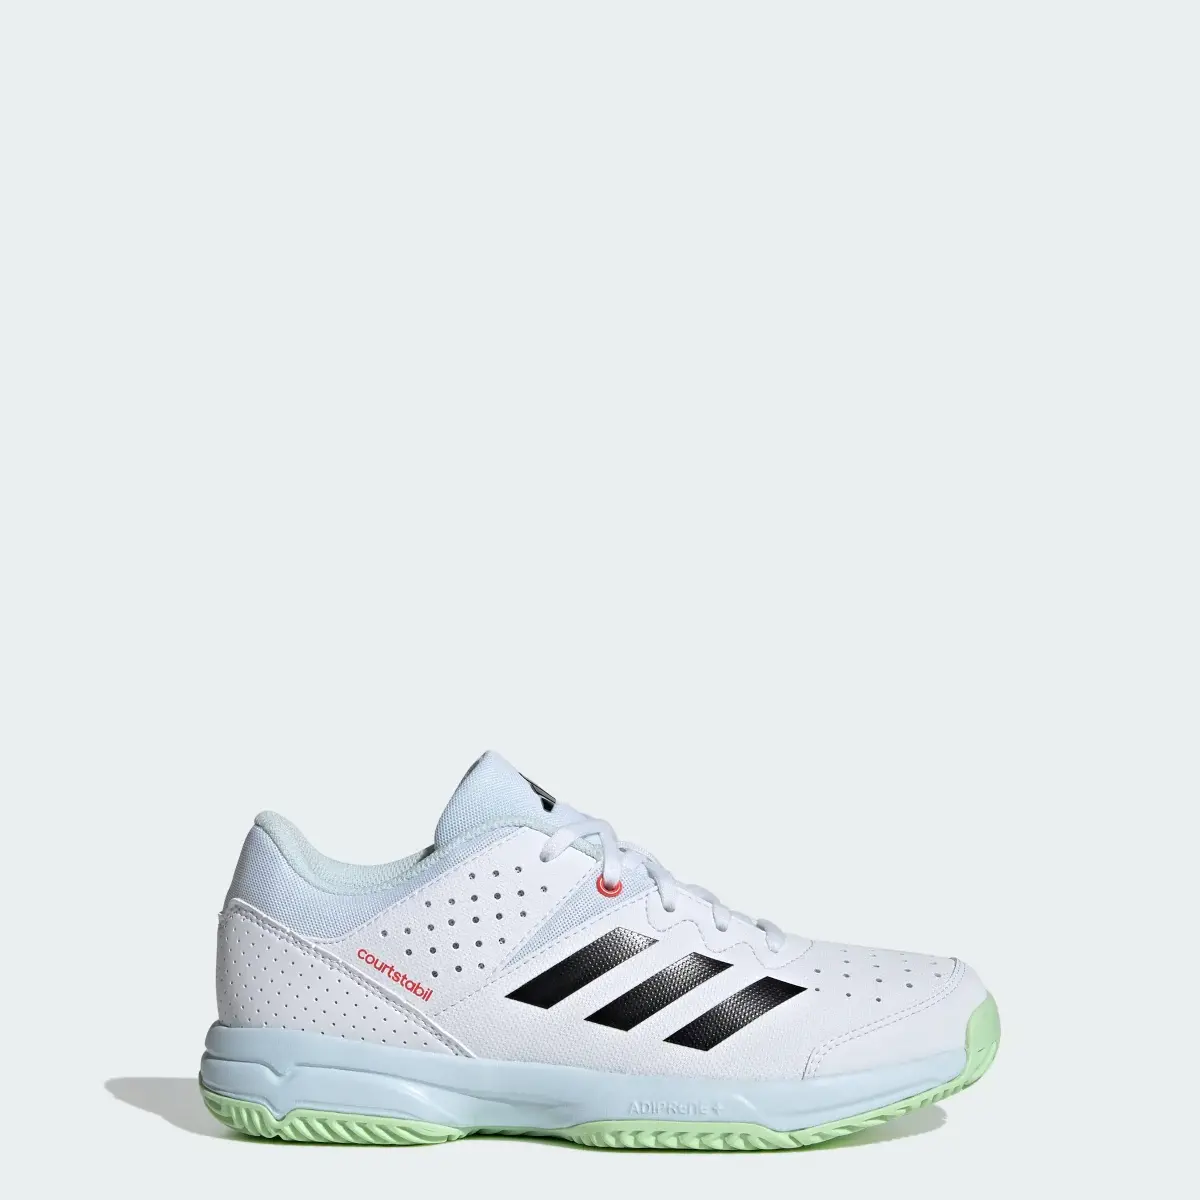 Adidas Court Stabil Shoes. 1